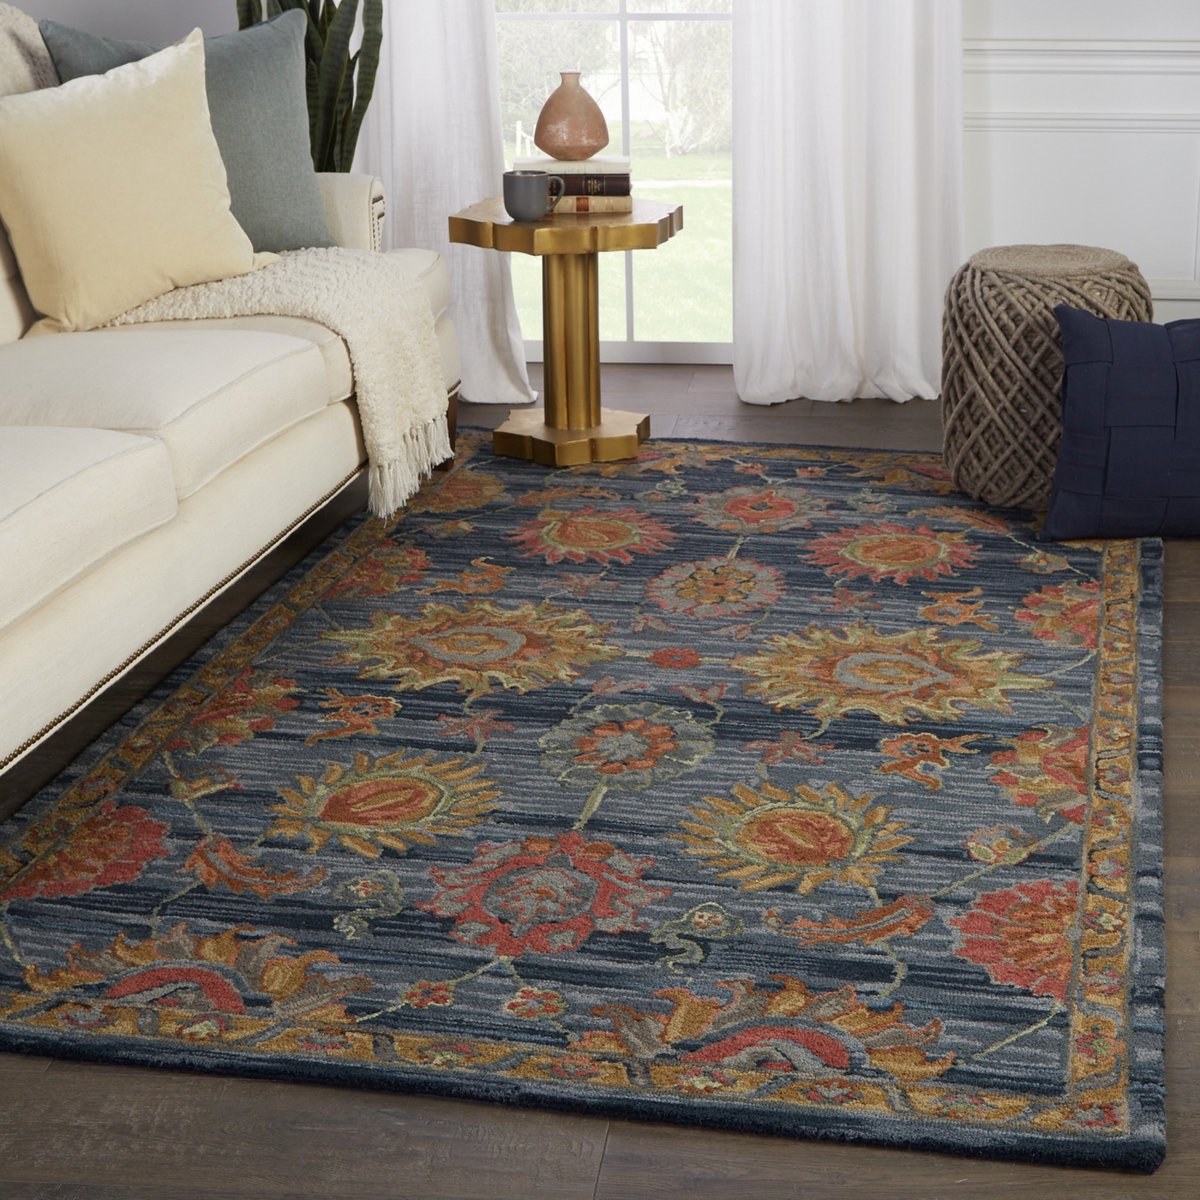 Emerson 6' X 9' Feet Blue Color Hand Tufted Persian Style 100% Wool Area Rug /Carpet 